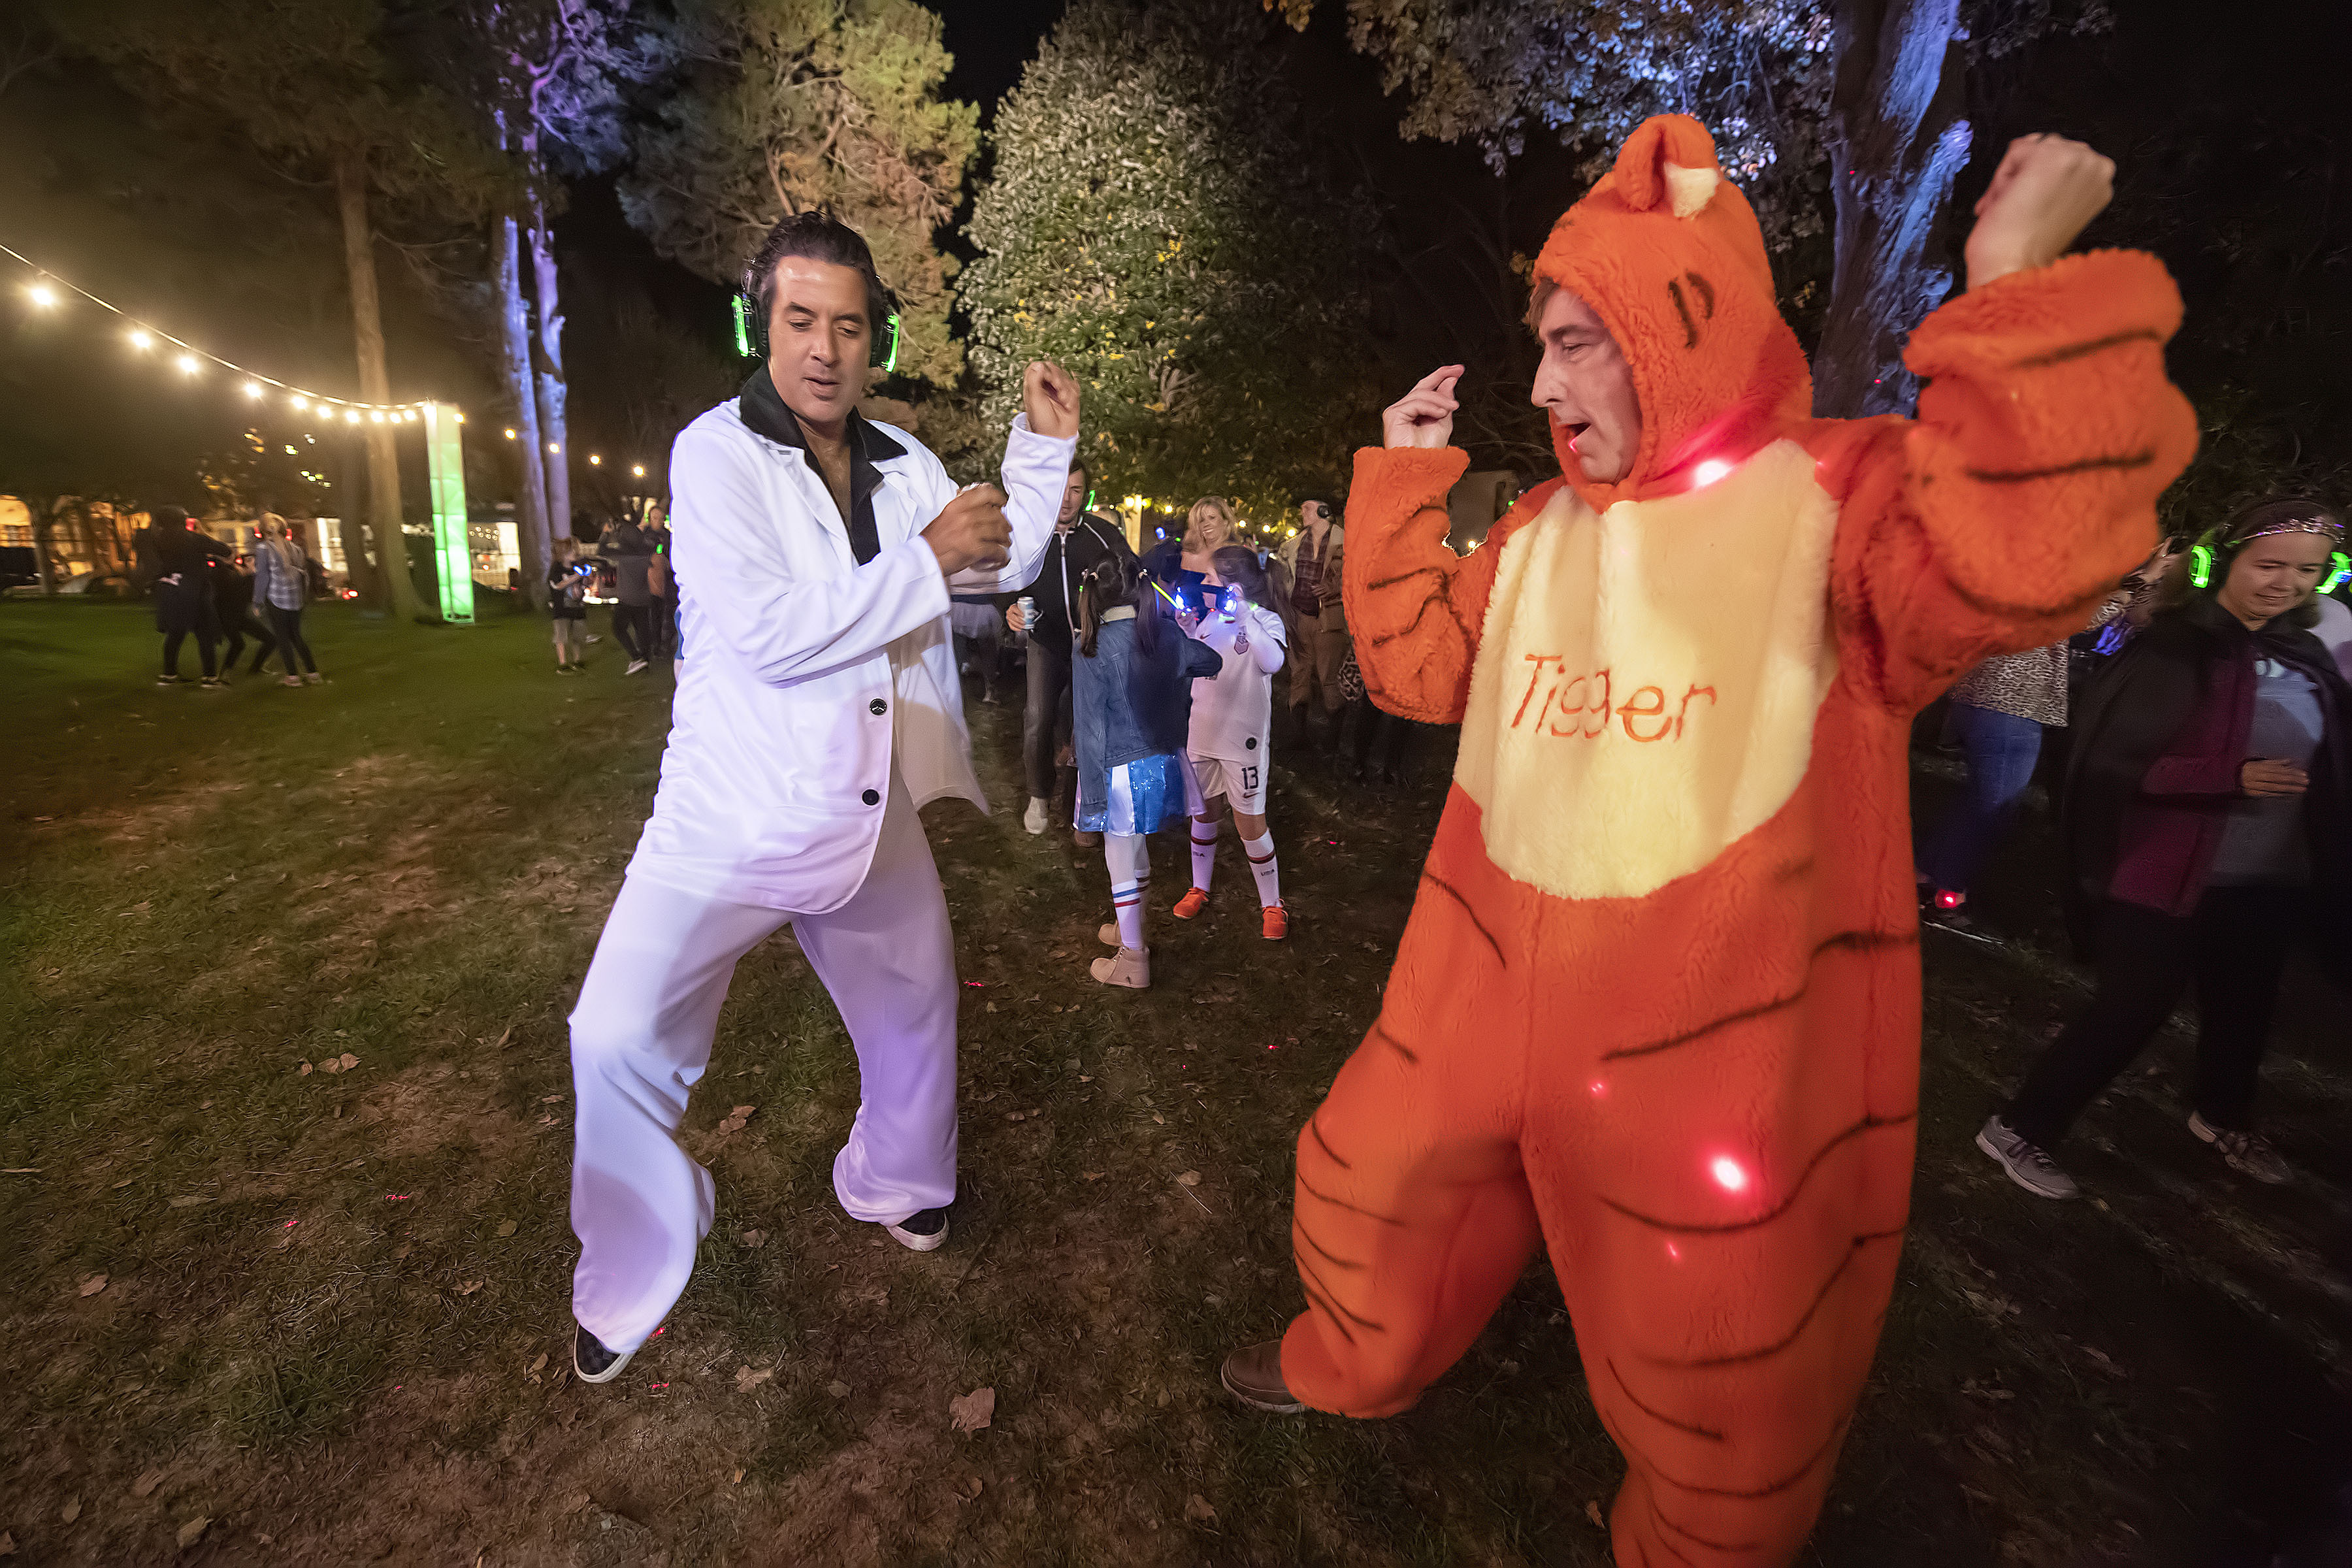 John Travolta and Tigger (aka Orson Cummings and Brian Darmody) rock out during the Halloween Silent Disco Party sponsored by the Southampton Arts Center on Saturday night.   MICHAEL HELLER